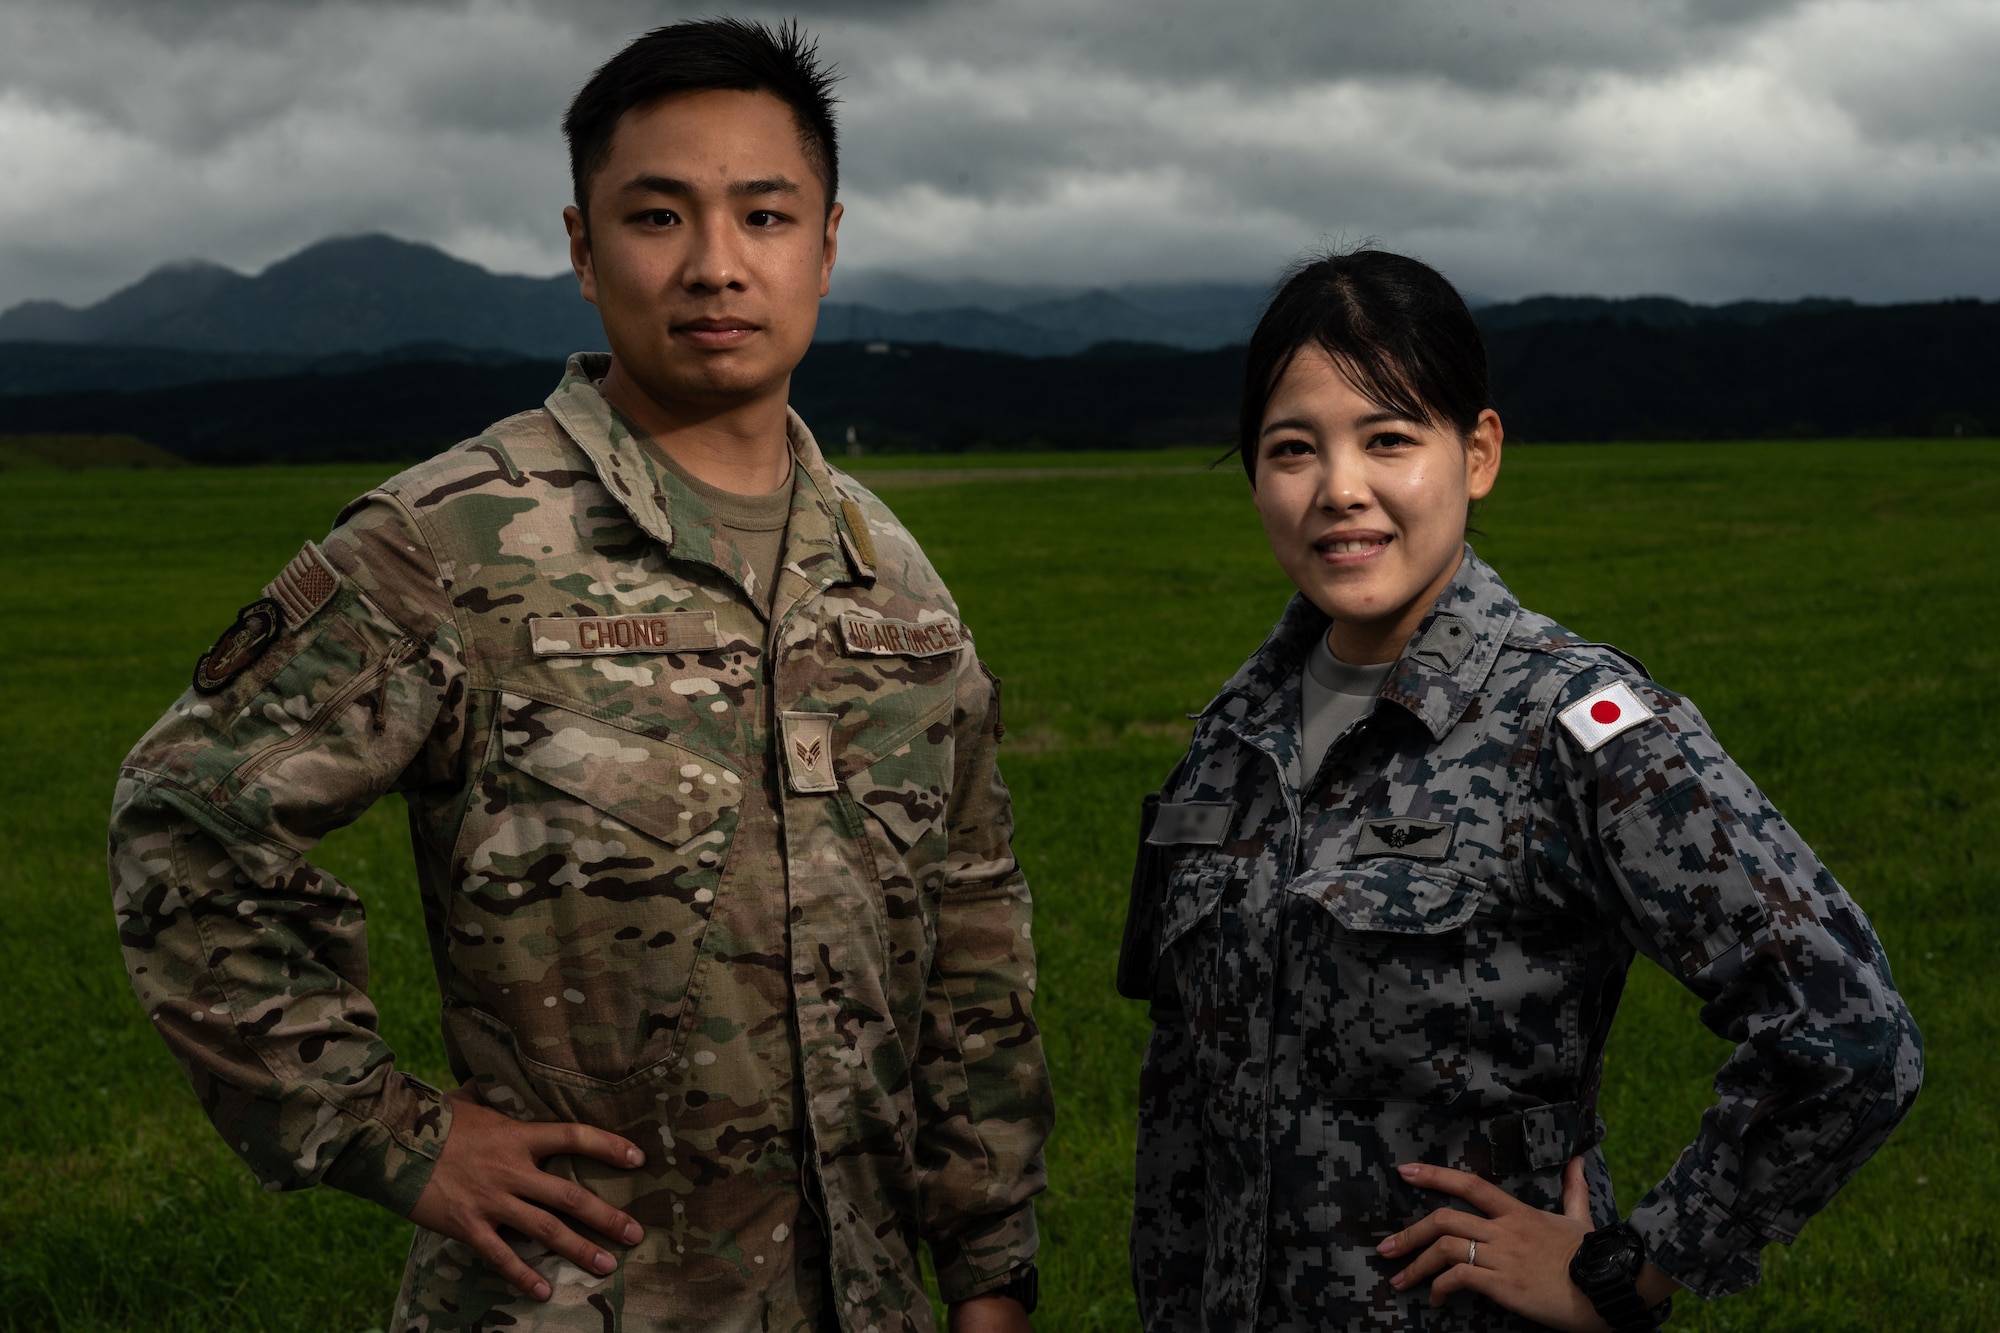 U.S. Air Force Senior Airman Kelvin Chong, left, 18th Security Forces Squadron Japanese translator, and Japan Air Self-Defense Force Staff Sgt. Hinata Misora, poses for a portrait in support of Mobility Guardian 2023, at Yakumo Sub Base, Japan, July 13, 2023. During MG23, Chong and Misora served as the strategic cultural representative for the Japanese Air Self-Defense Force and U.S. Air Force ensuring accurate and efficient communication among partner nations. A multilateral endeavor, MG23 features participating countries – Australia, Canada, France, Japan, New Zealand, United Kingdom, and the United States – operating approximately 70 mobility aircraft across multiple locations spanning a 3,000 mile exercise area from July 5-21 (U.S. Air Force photo by Tech. Sgt. Alexander Cook)